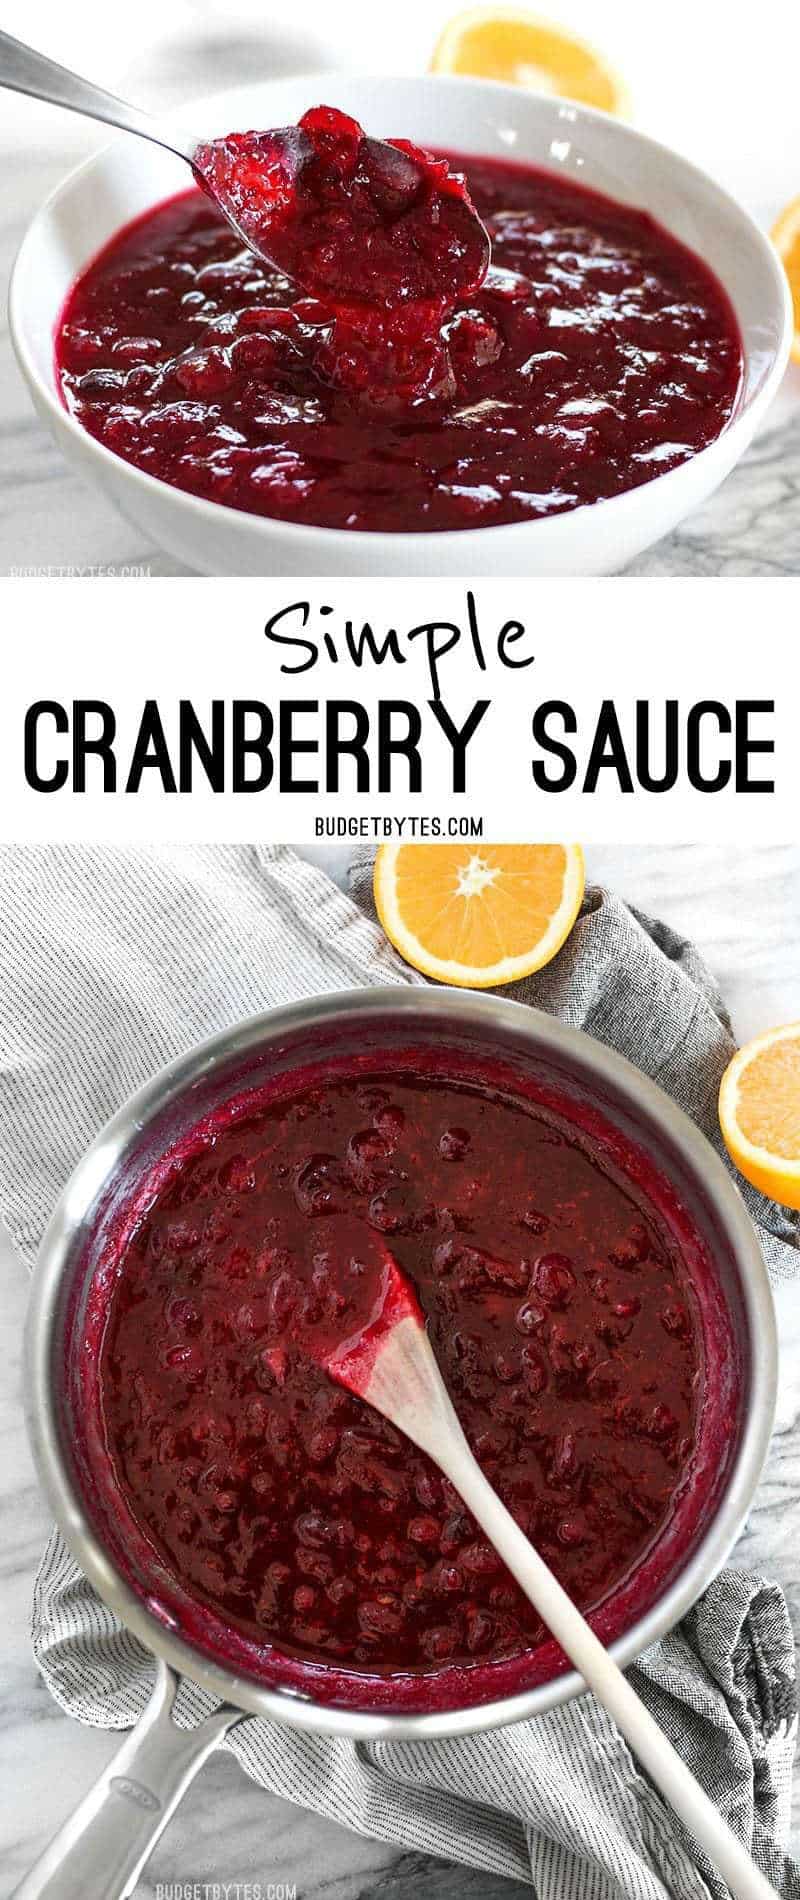 This simple cranberry sauce only requires three ingredients but has enough flavor to add excitement to your holiday meal. BudgetBytes.com